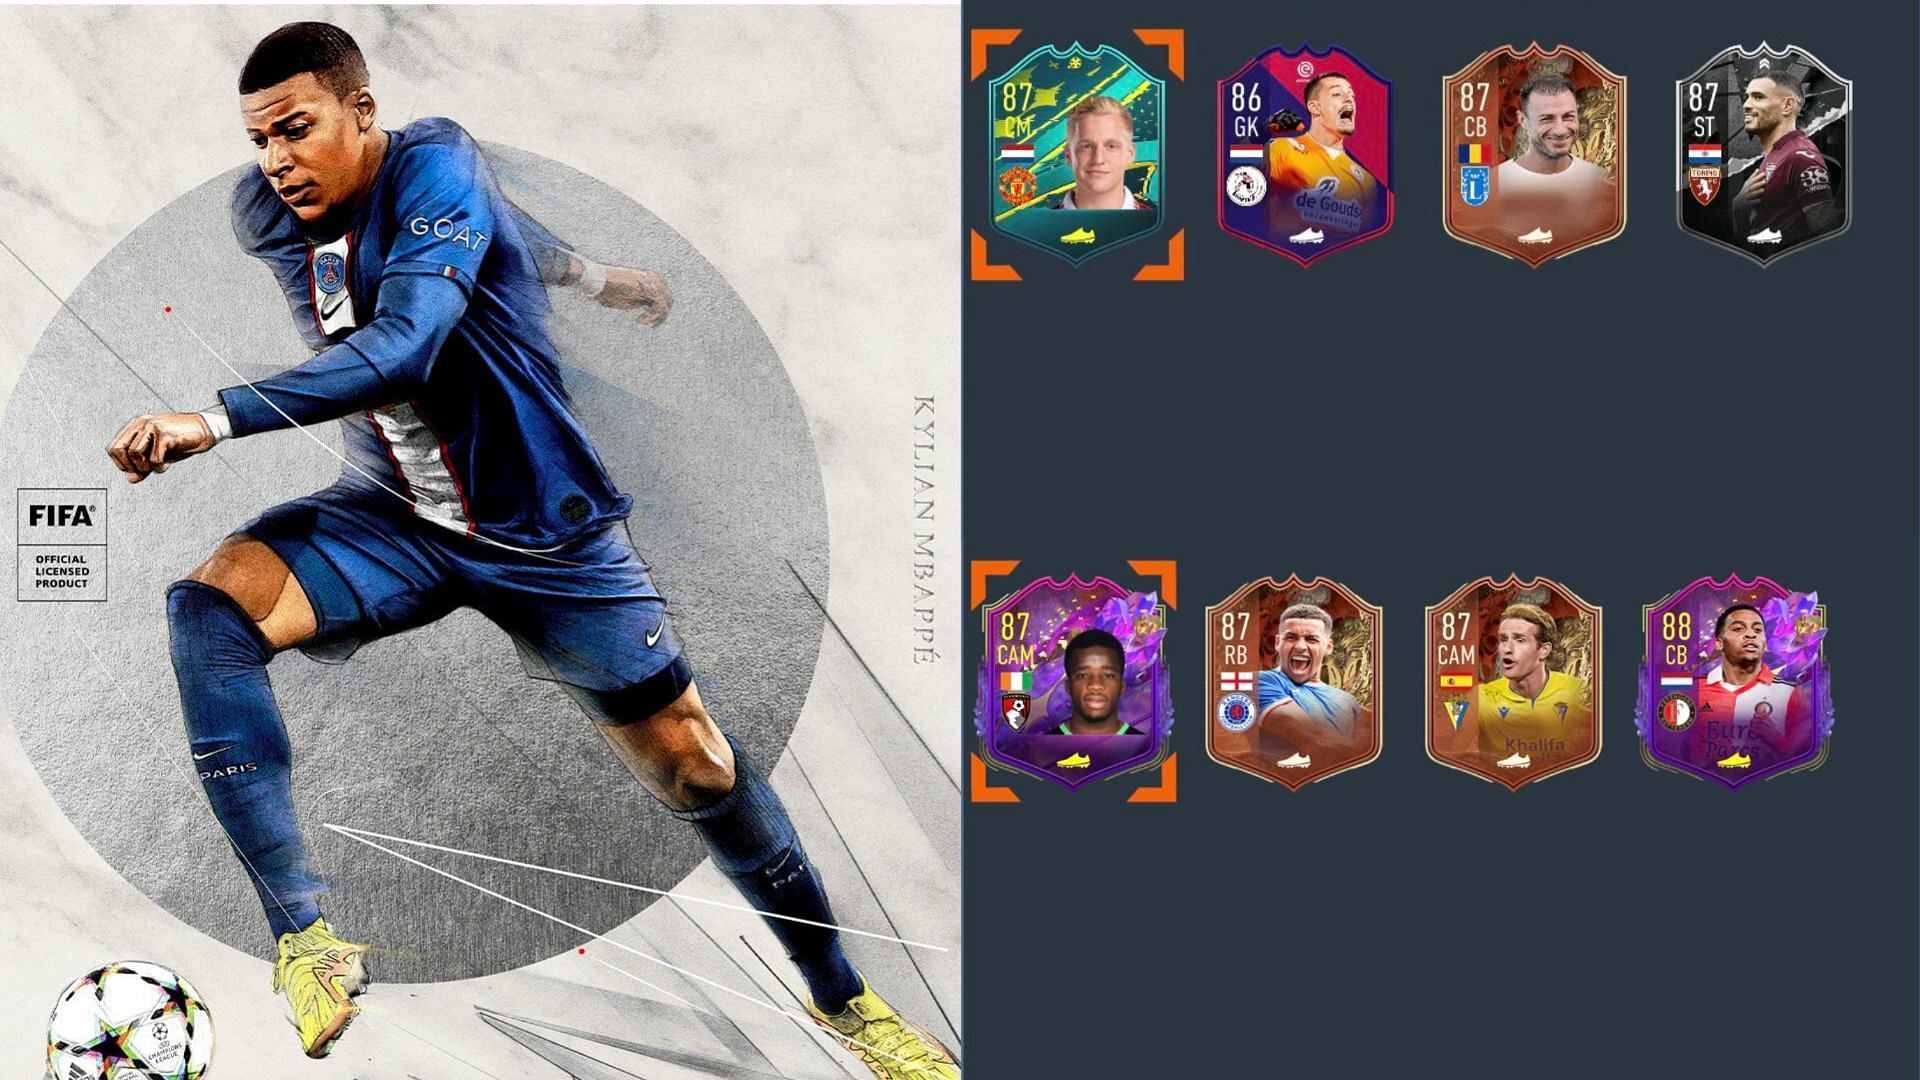 The Year in Review Player Pick SBC is a great option for many FIFA 23 players who have missed out on special content in the past (Images via EA Sports)